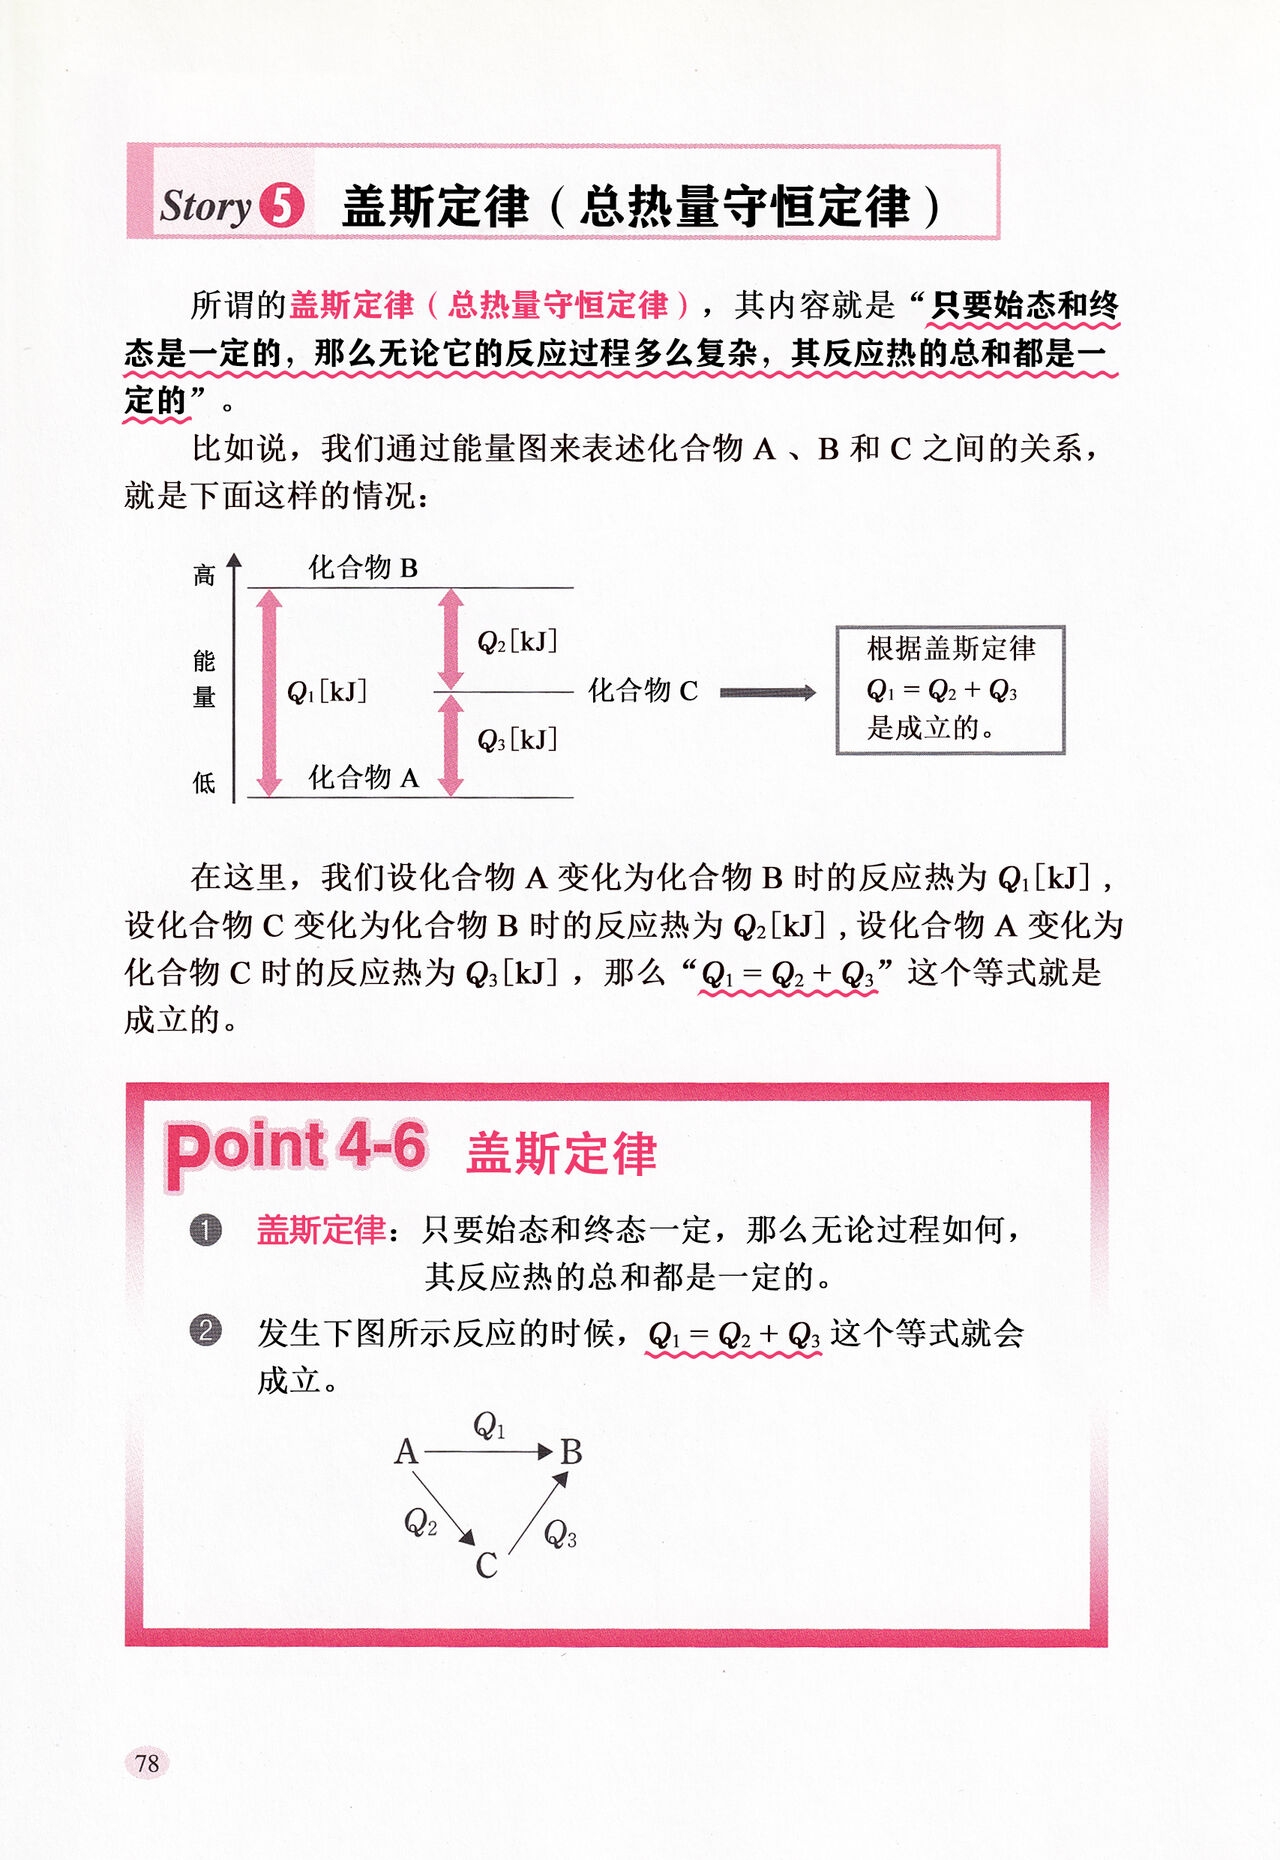 Let's Learn Chemistry with Lucky☆Star -Basic Theory- Section 1-5|和幸运星一起学化学 -理论篇- 第1-5章[Chinese][桃樹漢化組] 89